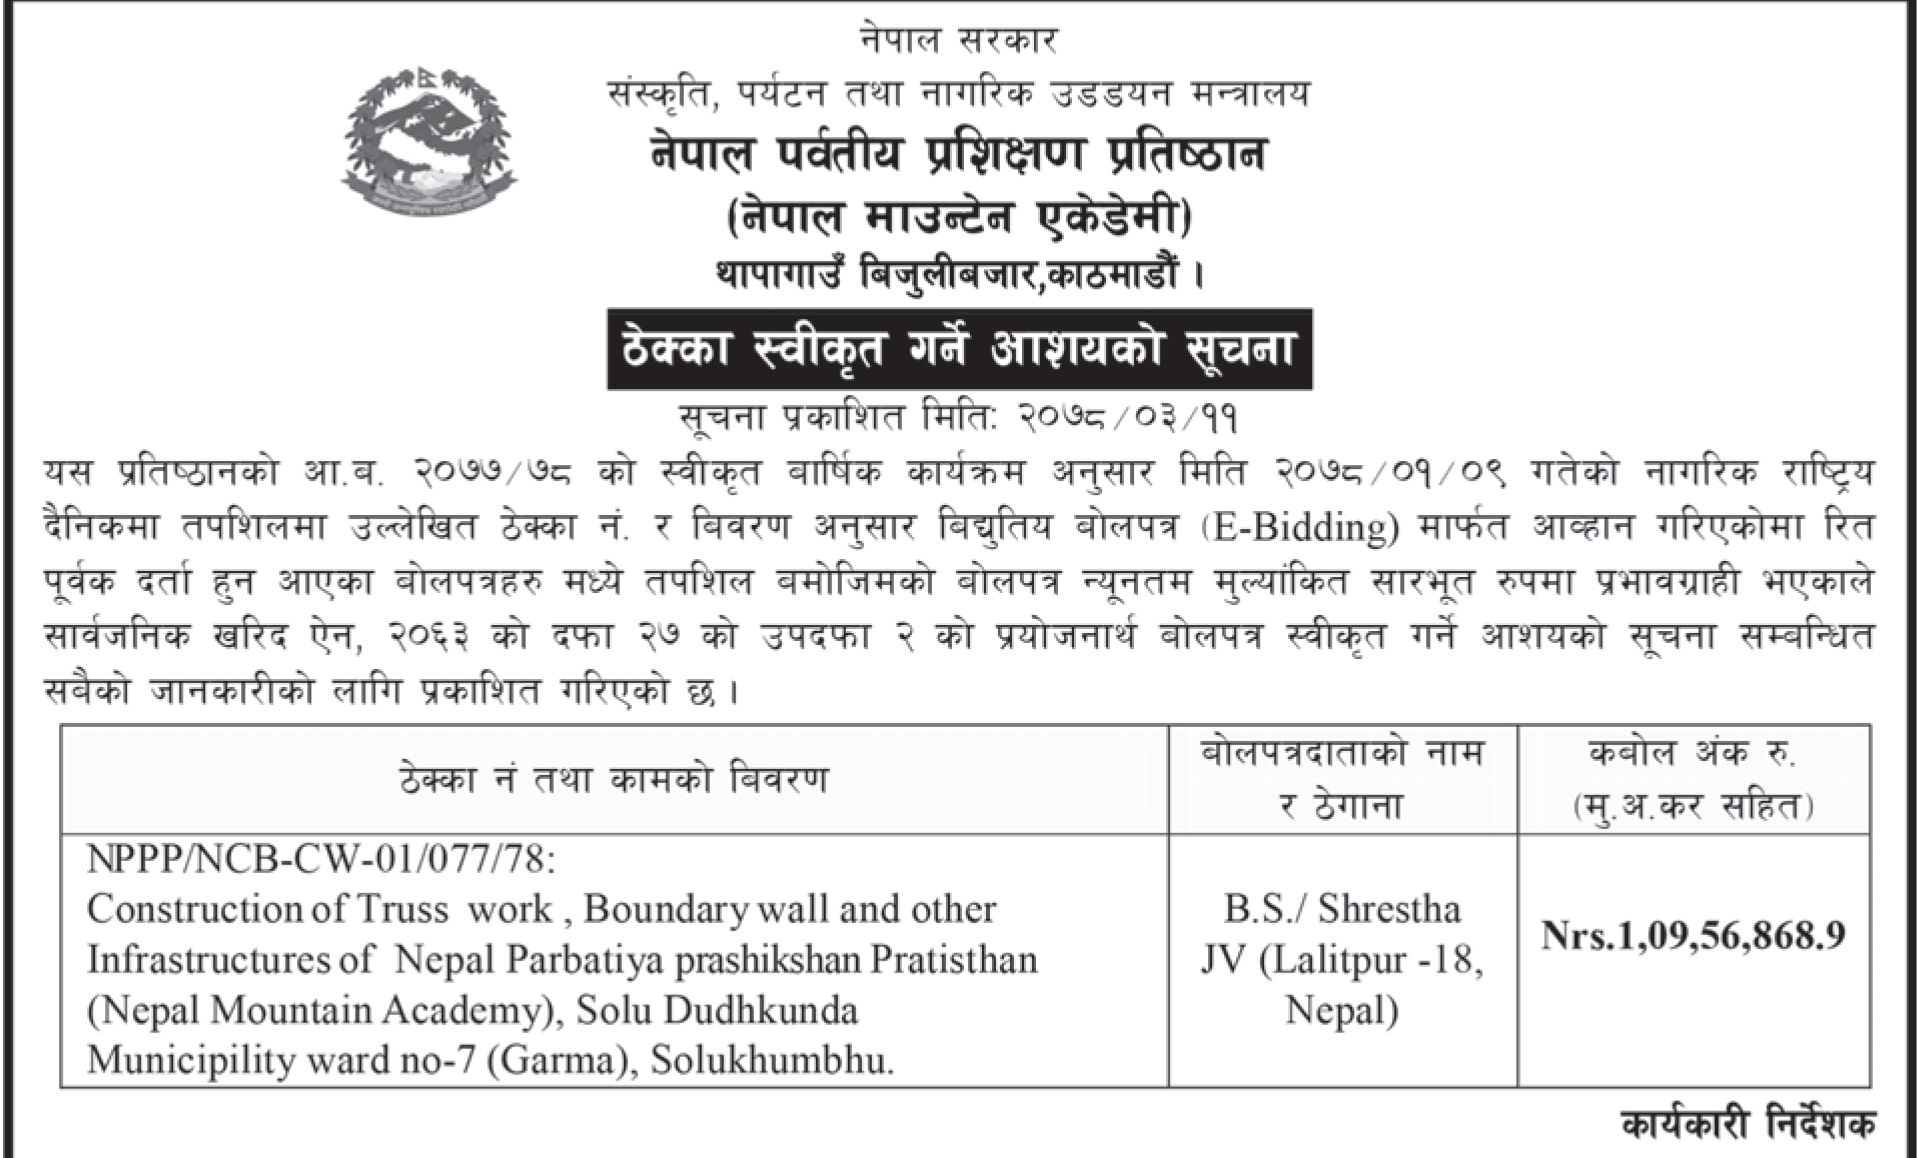 Nepal Mountain Academy, Bijulibazar selects M/S BS/Shrestha JV, Lalitpur for some construction works. Image 8(5).png